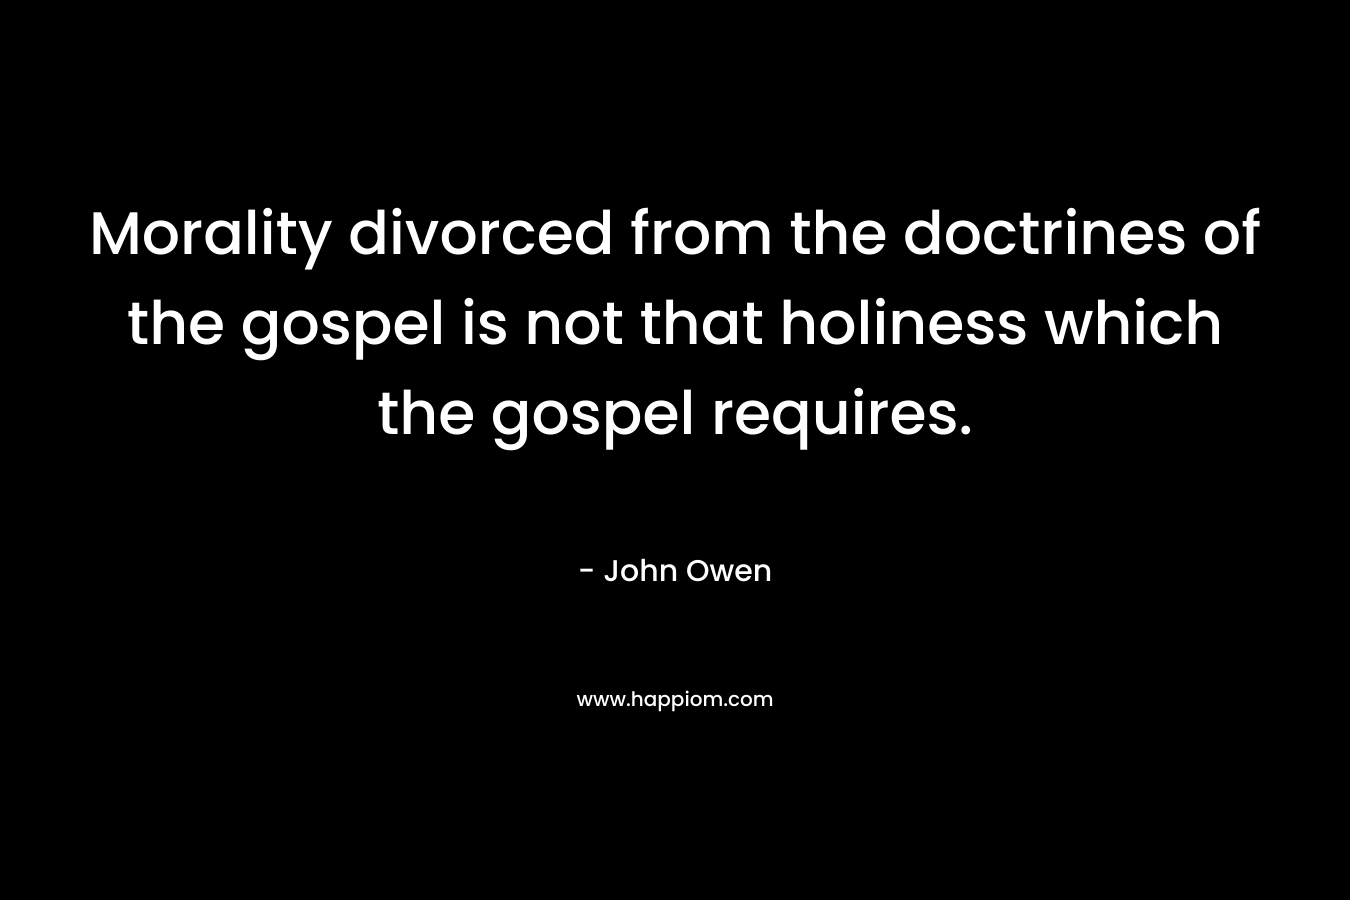 Morality divorced from the doctrines of the gospel is not that holiness which the gospel requires.